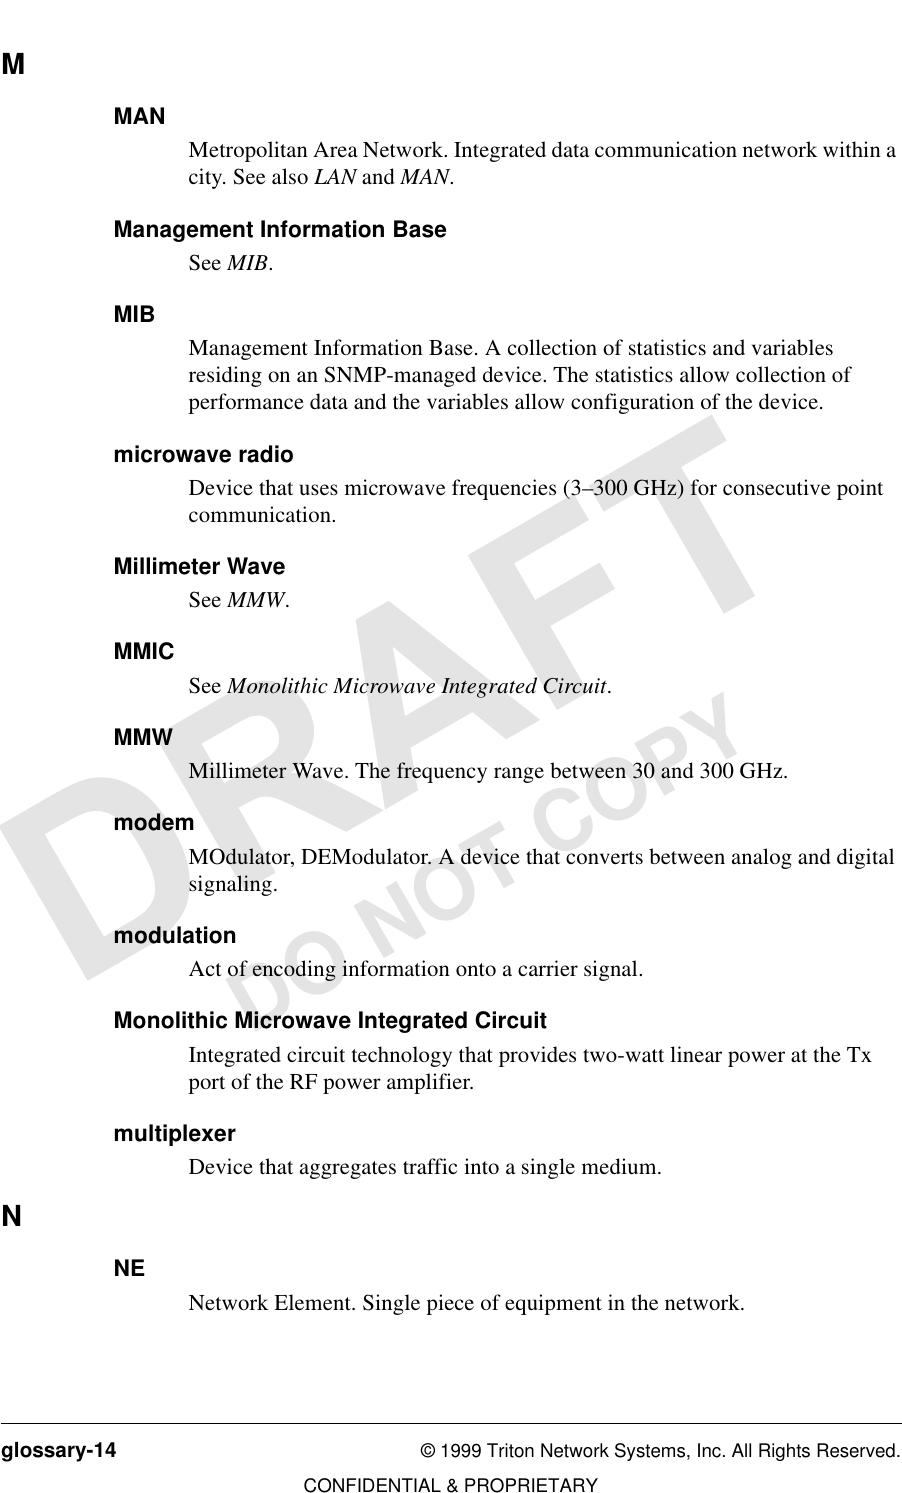 glossary-14 © 1999 Triton Network Systems, Inc. All Rights Reserved.CONFIDENTIAL &amp; PROPRIETARYDO NOT COPYMMANMetropolitan Area Network. Integrated data communication network within a city. See also LAN and MAN.Management Information BaseSee MIB.MIBManagement Information Base. A collection of statistics and variables residing on an SNMP-managed device. The statistics allow collection of performance data and the variables allow configuration of the device.microwave radioDevice that uses microwave frequencies (3–300 GHz) for consecutive point communication.Millimeter WaveSee MMW.MMICSee Monolithic Microwave Integrated Circuit.MMWMillimeter Wave. The frequency range between 30 and 300 GHz. modemMOdulator, DEModulator. A device that converts between analog and digital signaling. modulationAct of encoding information onto a carrier signal.Monolithic Microwave Integrated CircuitIntegrated circuit technology that provides two-watt linear power at the Tx port of the RF power amplifier.multiplexerDevice that aggregates traffic into a single medium.NNENetwork Element. Single piece of equipment in the network.